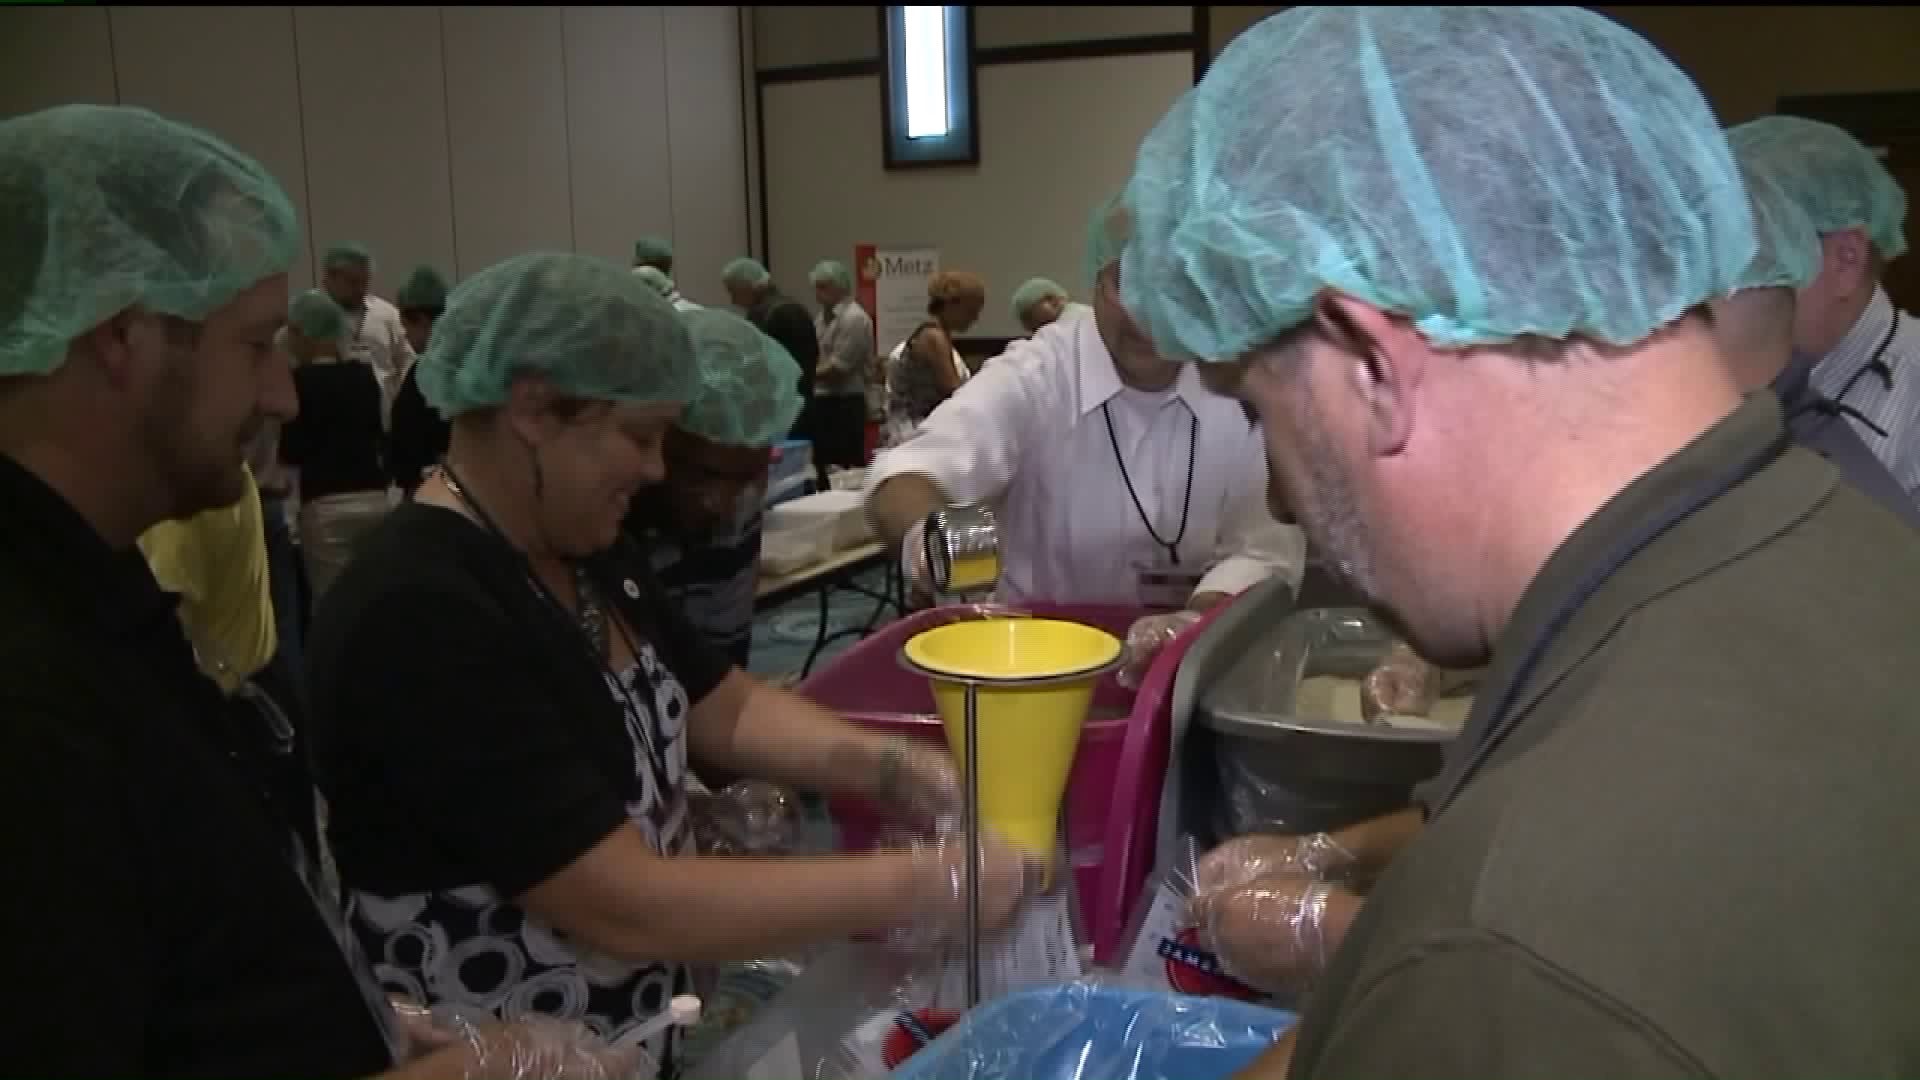 Volunteers Feed 75,000 Hungry Families in Less Than an Hour